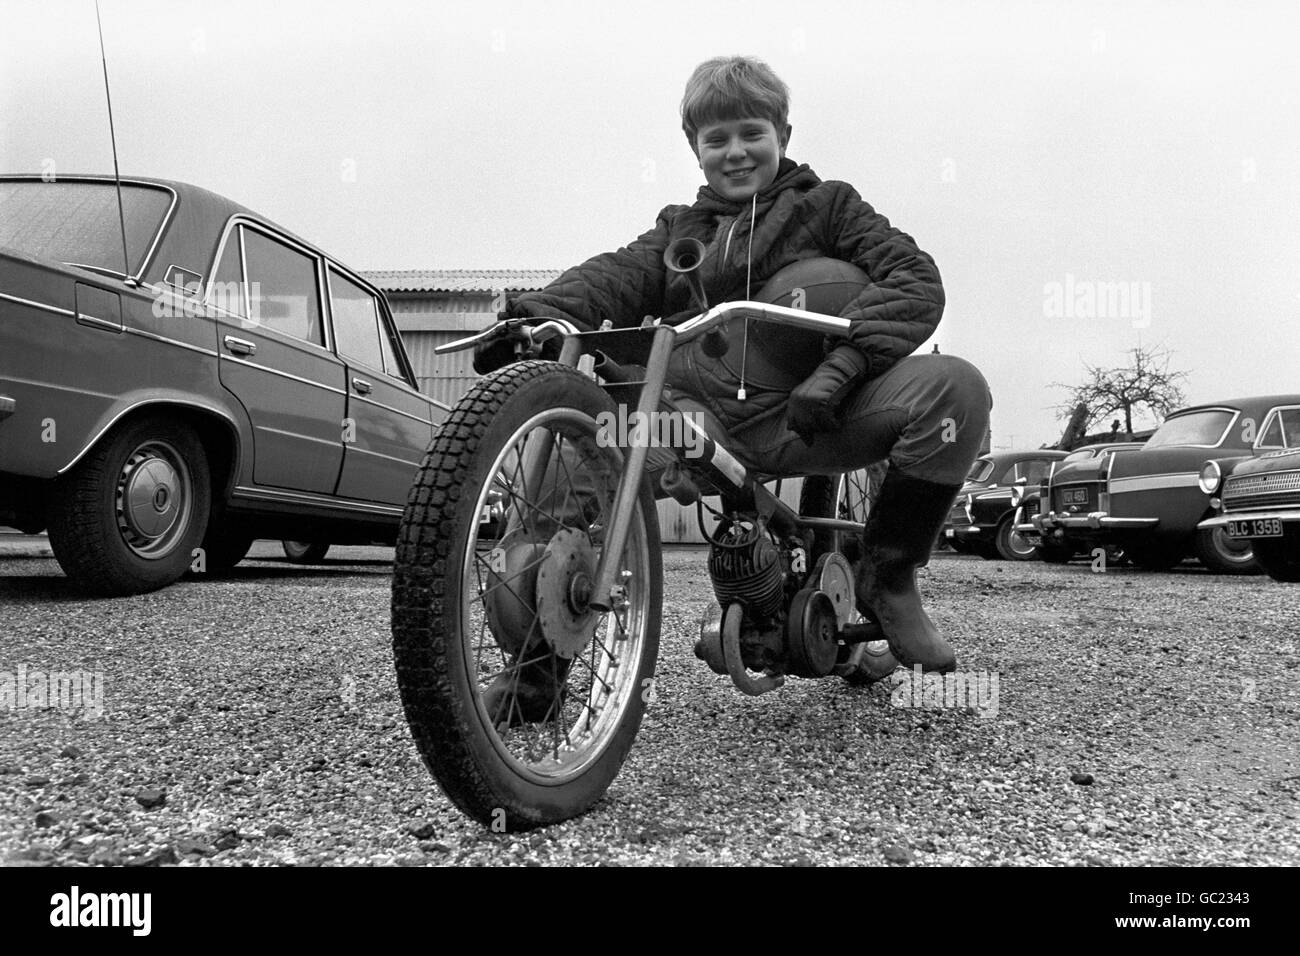 He is only 11 years old, but Ian Turner of Needham Market near Ipswich has his own motorcycle and, as he loves speed, has ideas of becoming a racing driver. Ian's machine, a gift from his parents, has a welded tubular frame, is powered by a 50cc engine and is capable of 25-30 mph. Stock Photo